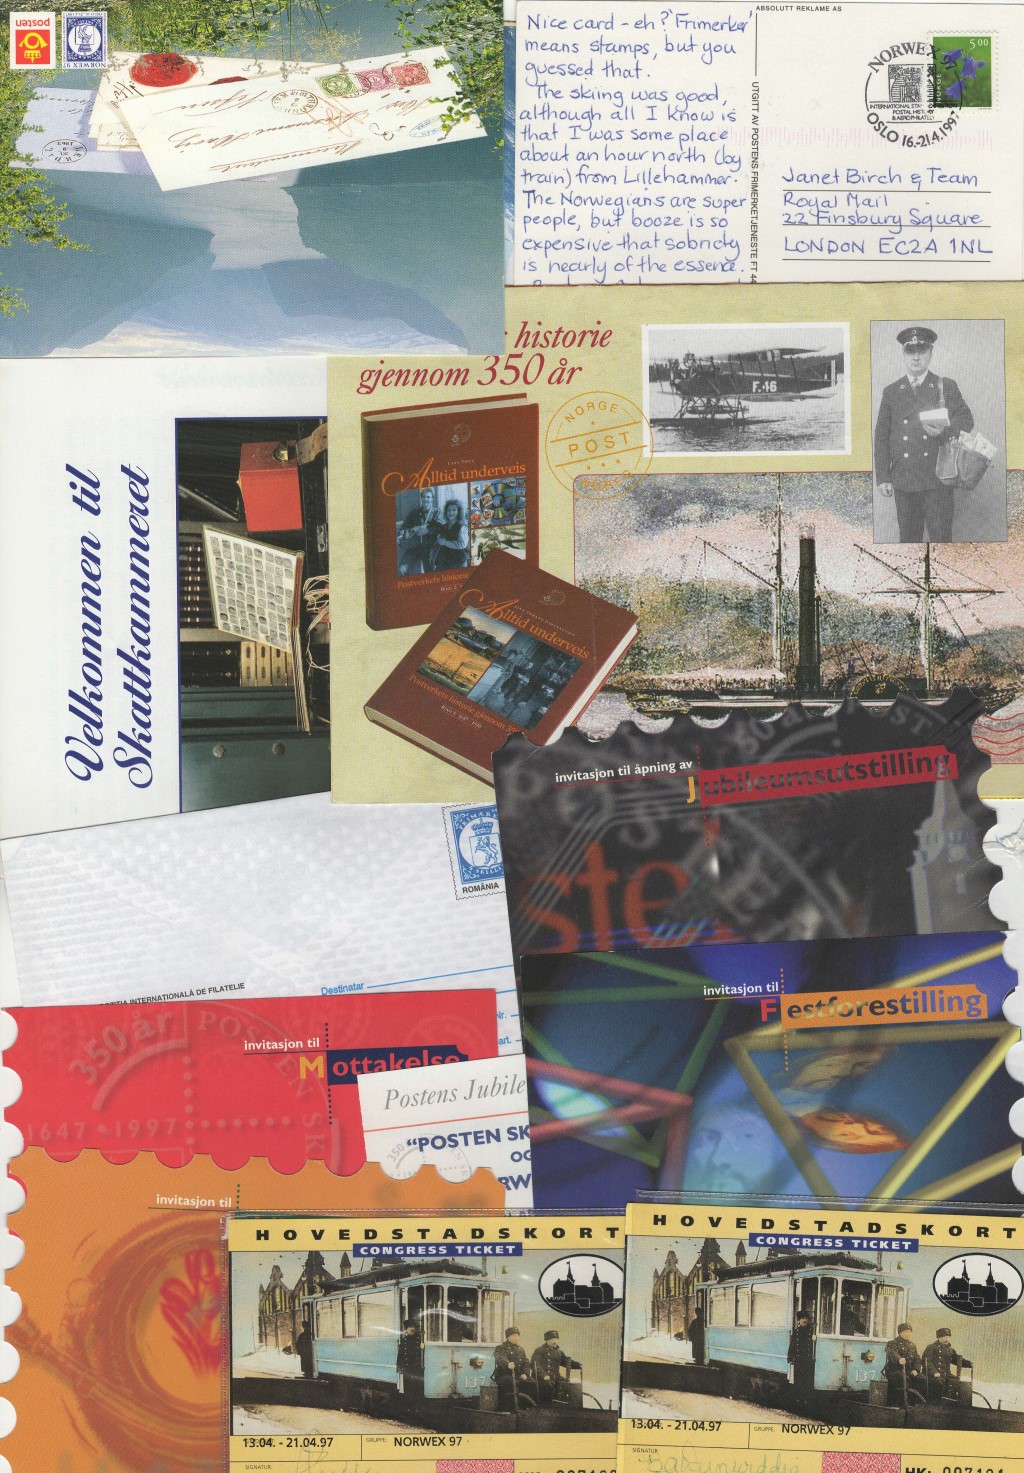 Norway 1997-collection of envelopes, invitations passes, post cards and leaflets sent to UK